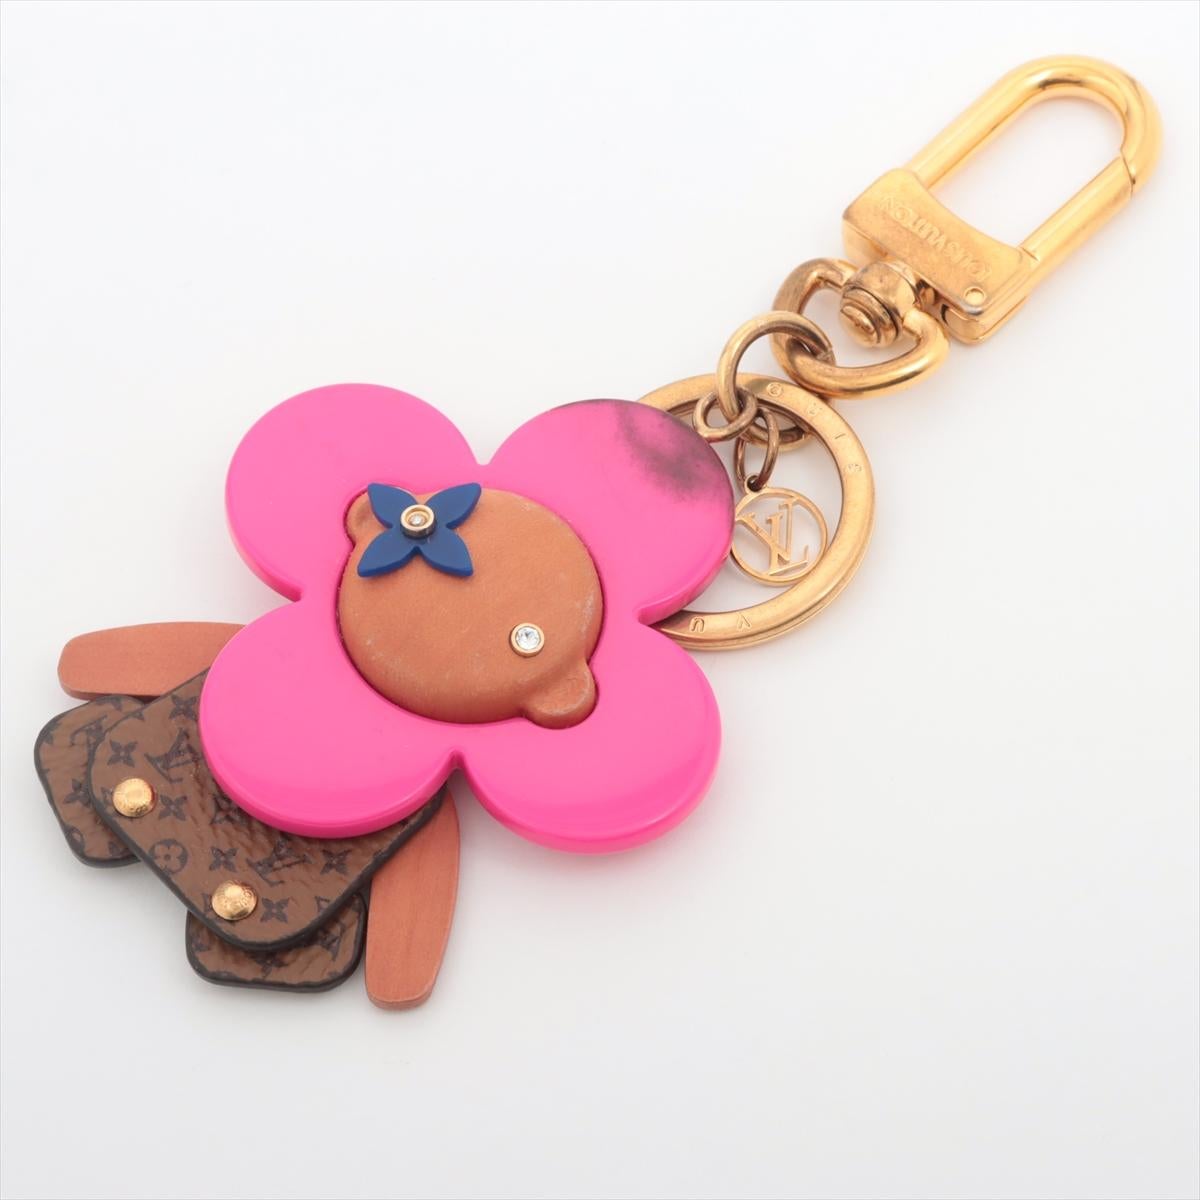 The Louis Vuitton Vivienne Puppet Bag Charm is a whimsical and charming accessory that brings a playful spirit to any Louis Vuitton bag. Meticulously crafted, the puppet charm features a miniature version of Vivienne, Louis Vuitton's iconic mascot,